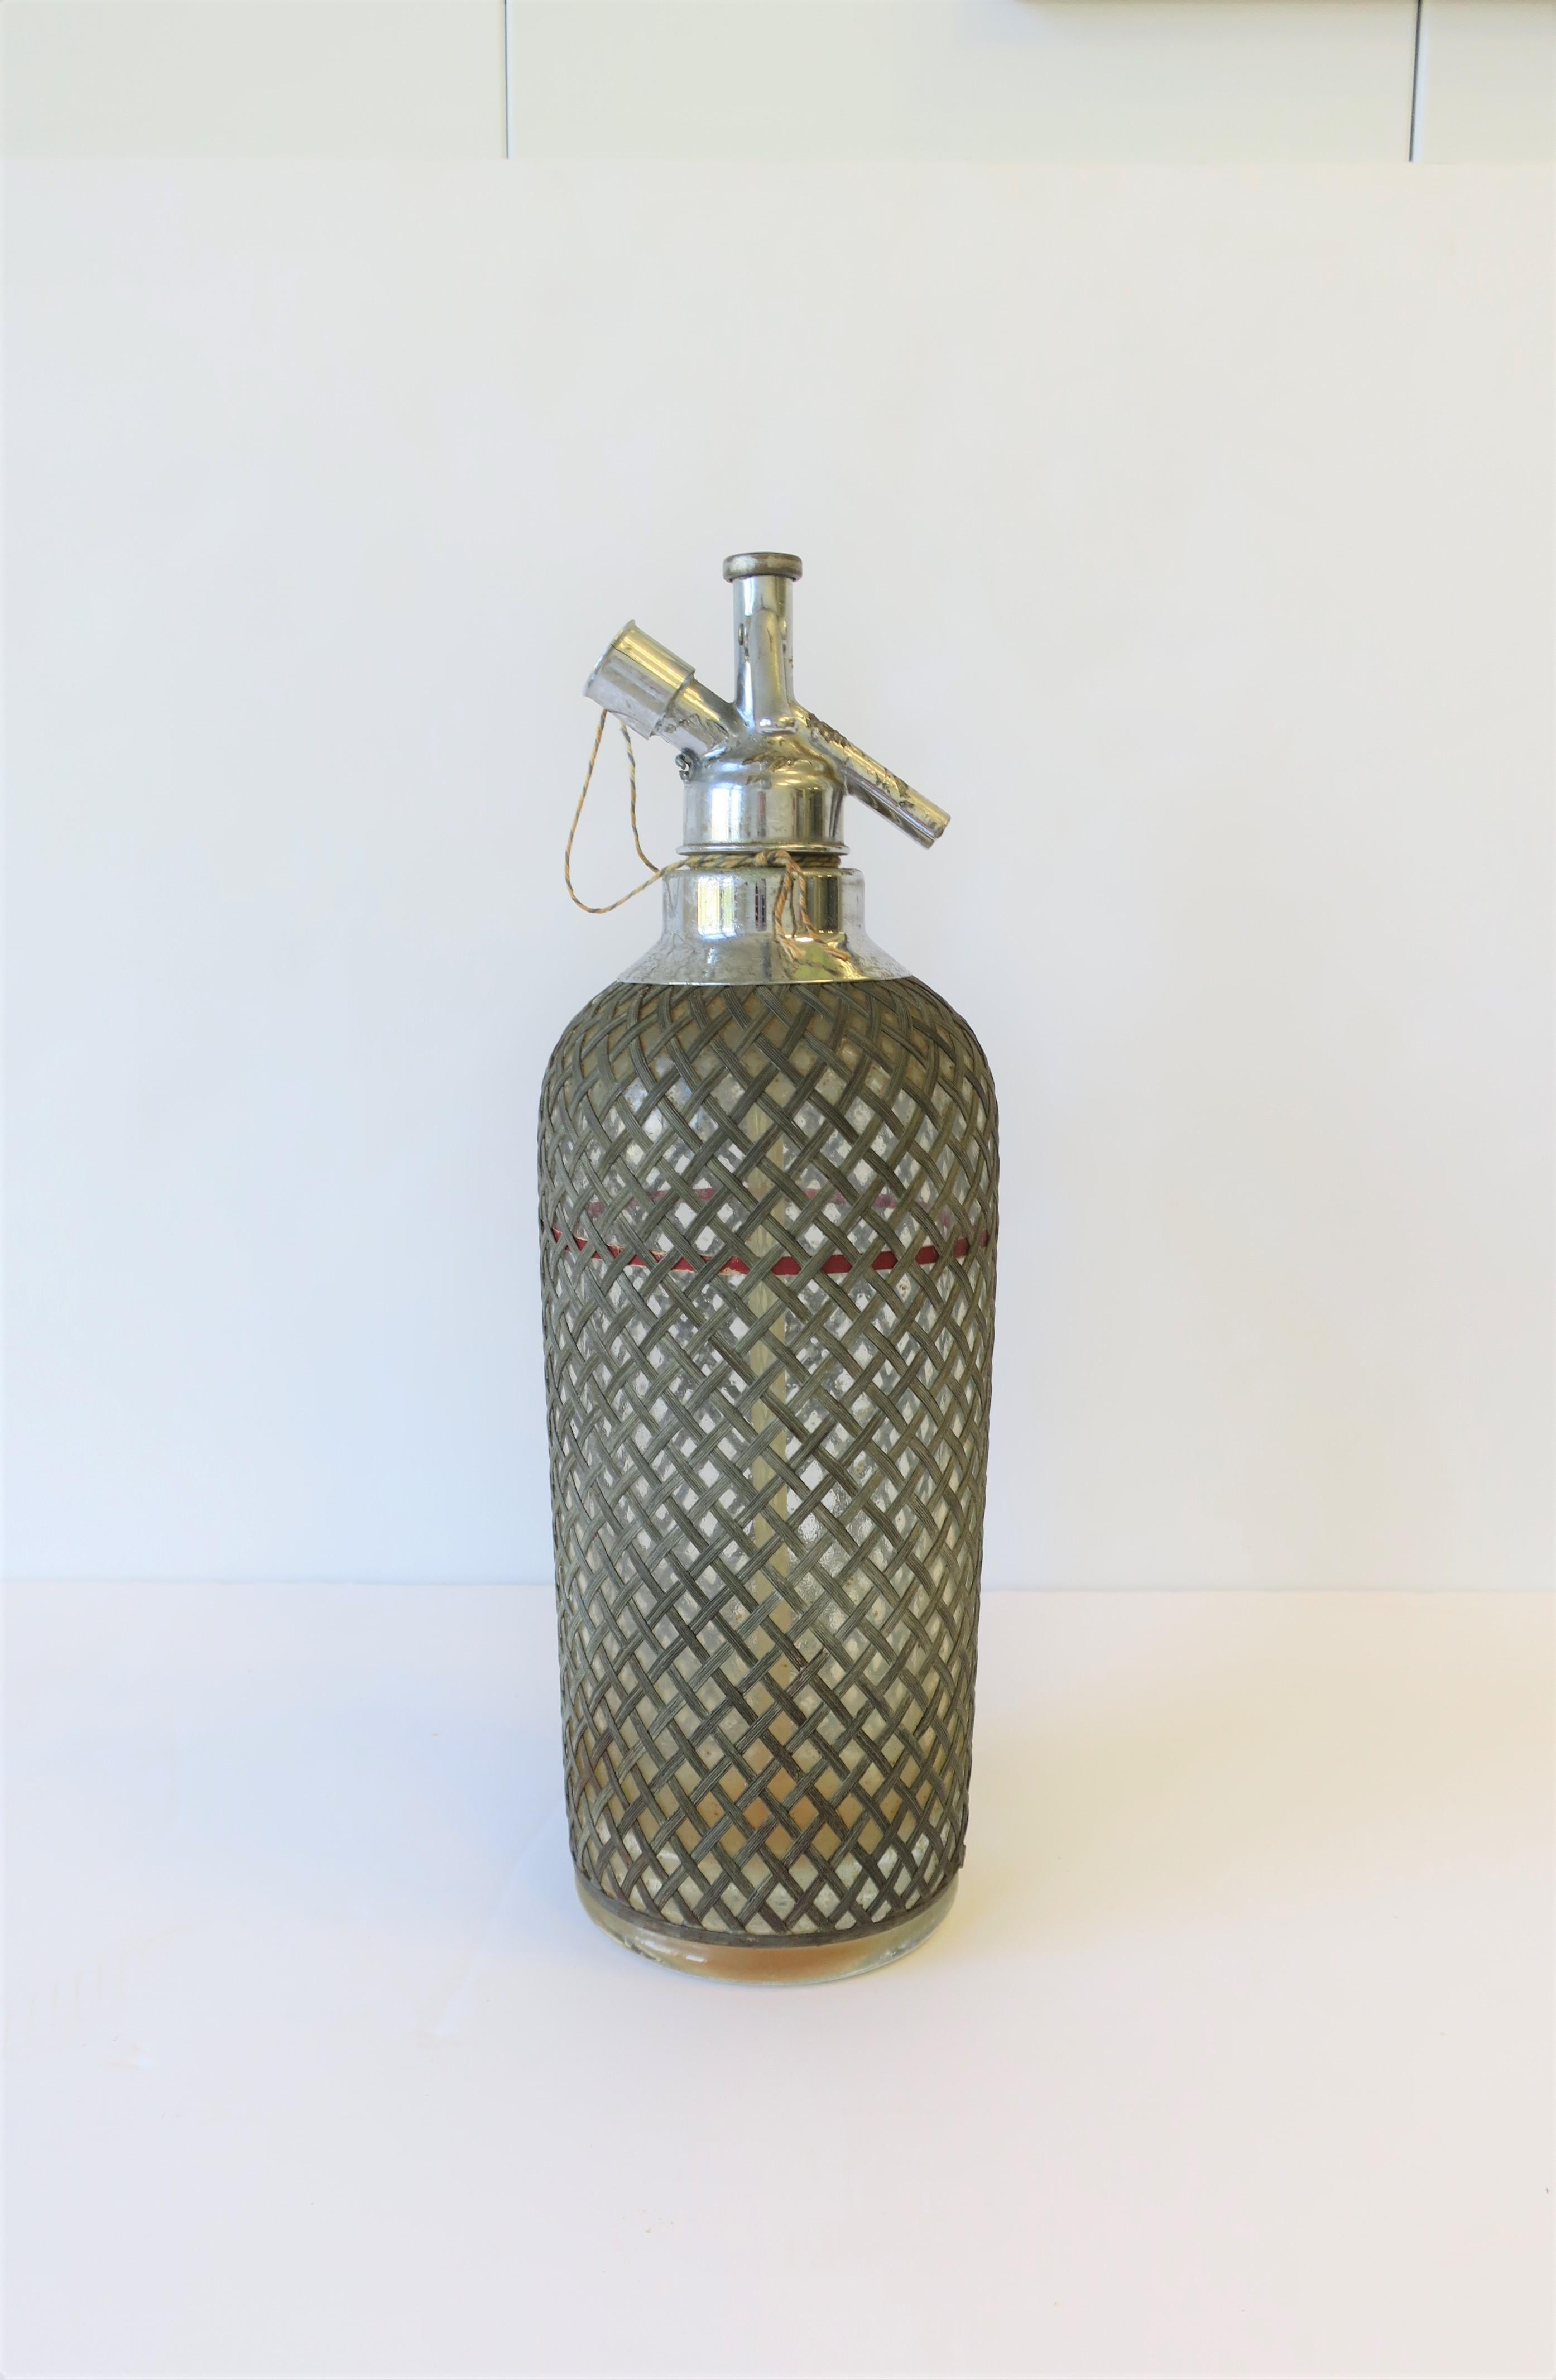 An early 20th century rare glass 'syphon' seltzer soda water bottle with metal wicker wire mesh protection. Bottle was made for New York soda company 'Sparklets' New York, as show in images #10 and 11. Bottle is marked on bottom, 